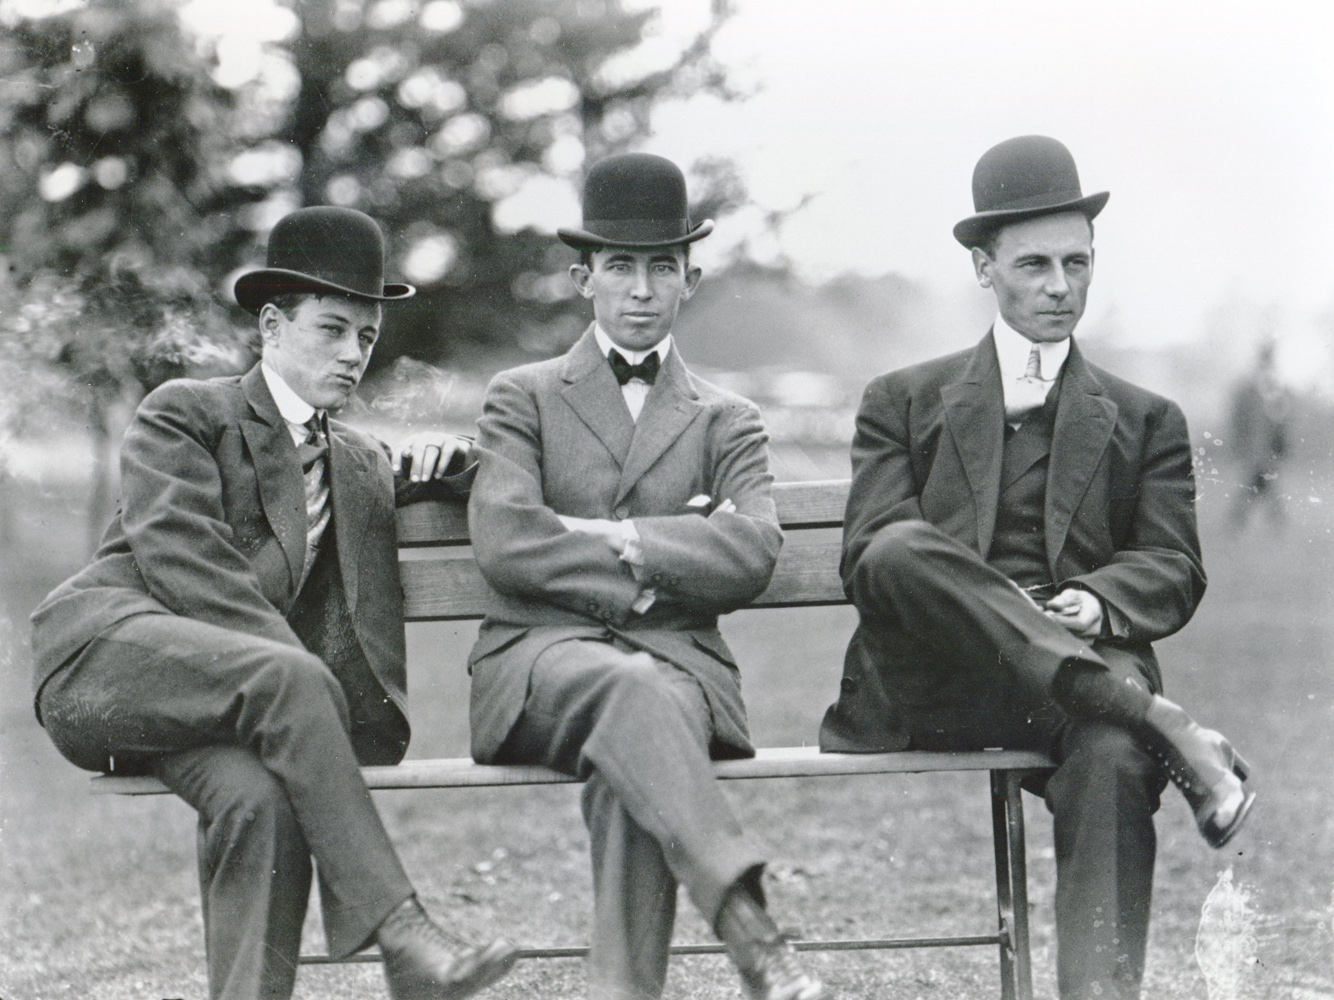 Frank O'Neill, Tommy Burns, and Willie Shaw (from left to right) (Keeenland Library Cook Collection/Museum Collection)